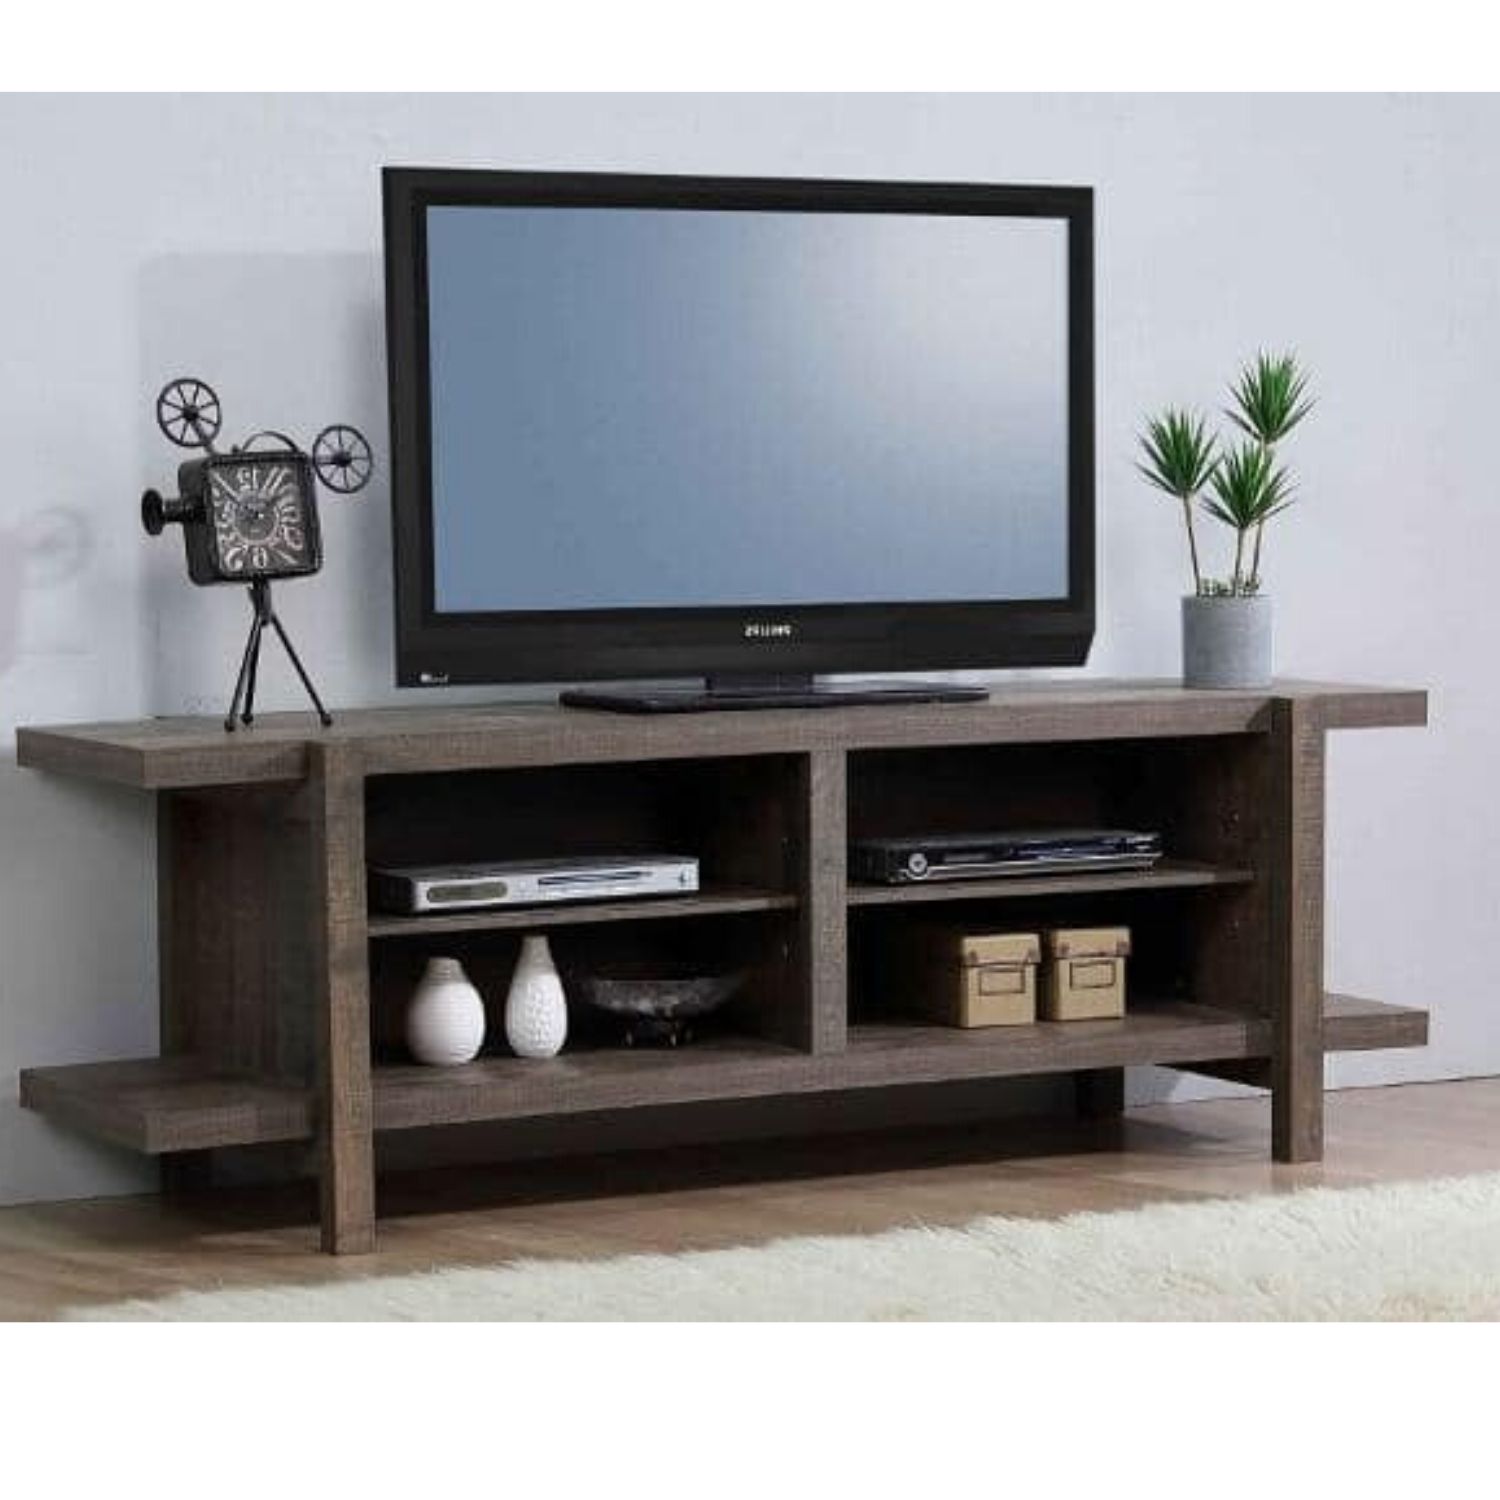 Tammy 65'' Tv Stand For Tvs Up To 70'', Rustic Mdf Wood Tv With Regard To Caleah Tv Stands For Tvs Up To 65&quot; (View 17 of 20)